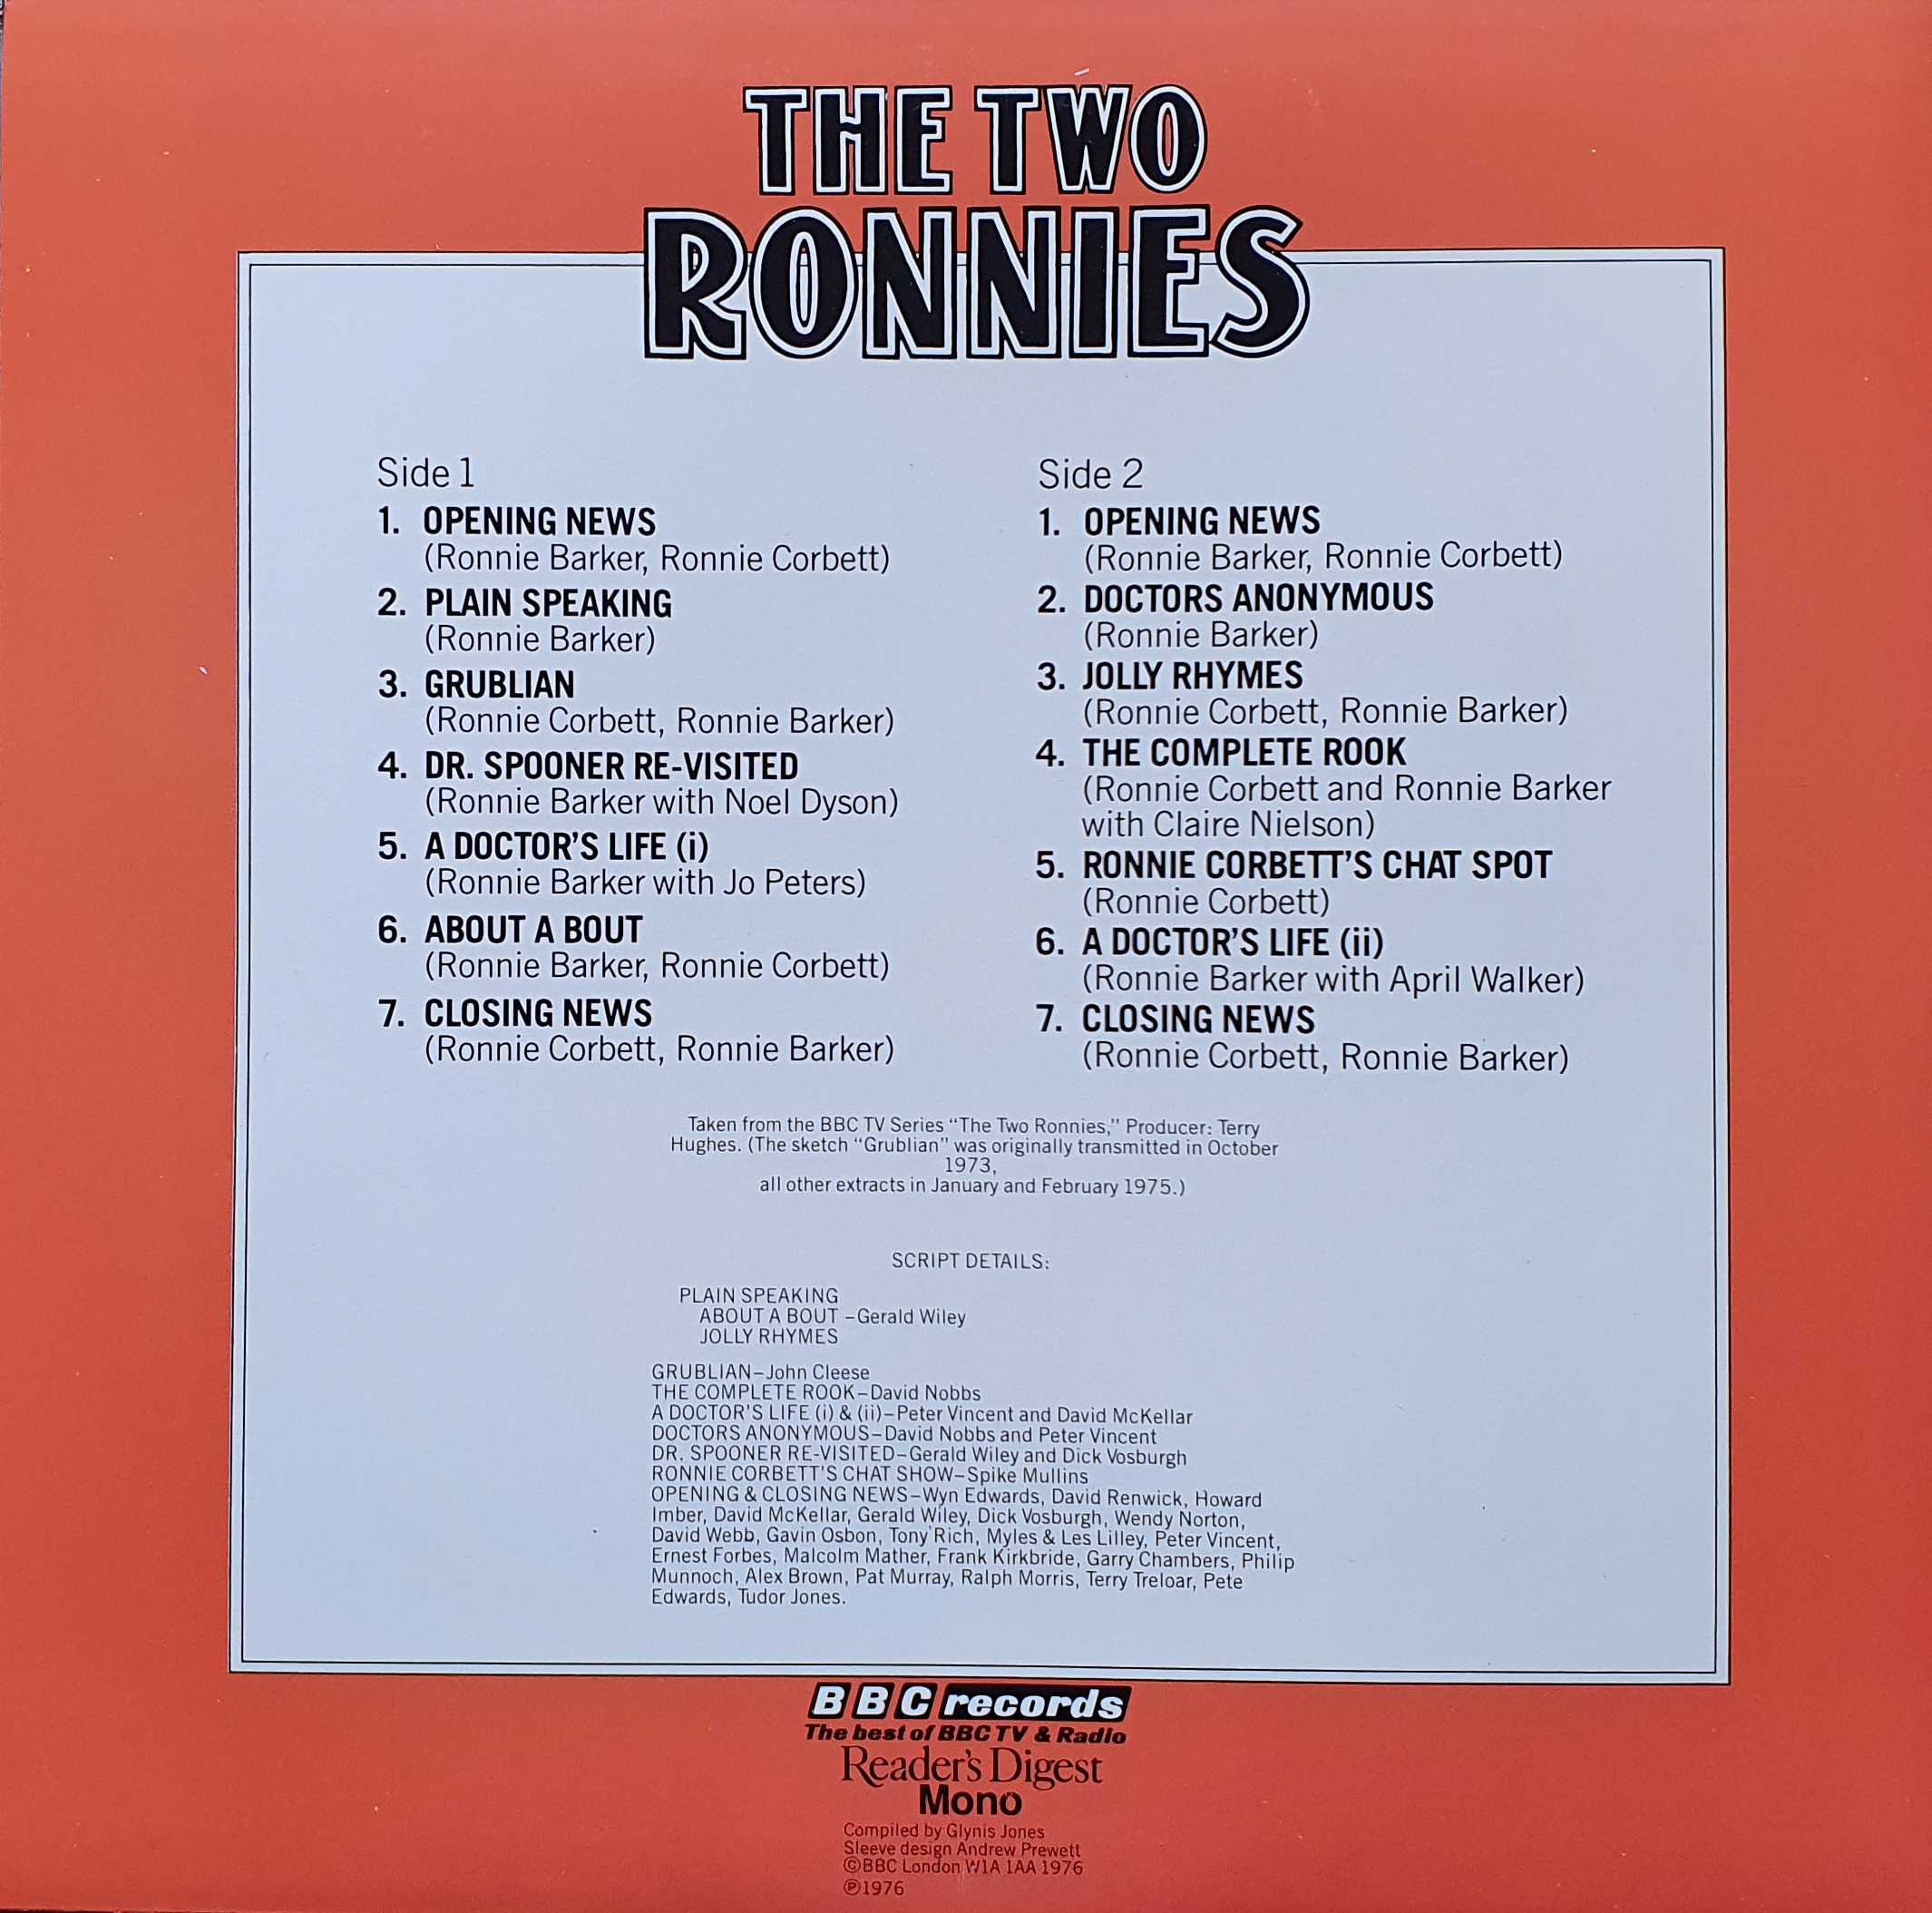 Picture of RD4-358-4 The two Ronnies by artist Various from the BBC records and Tapes library